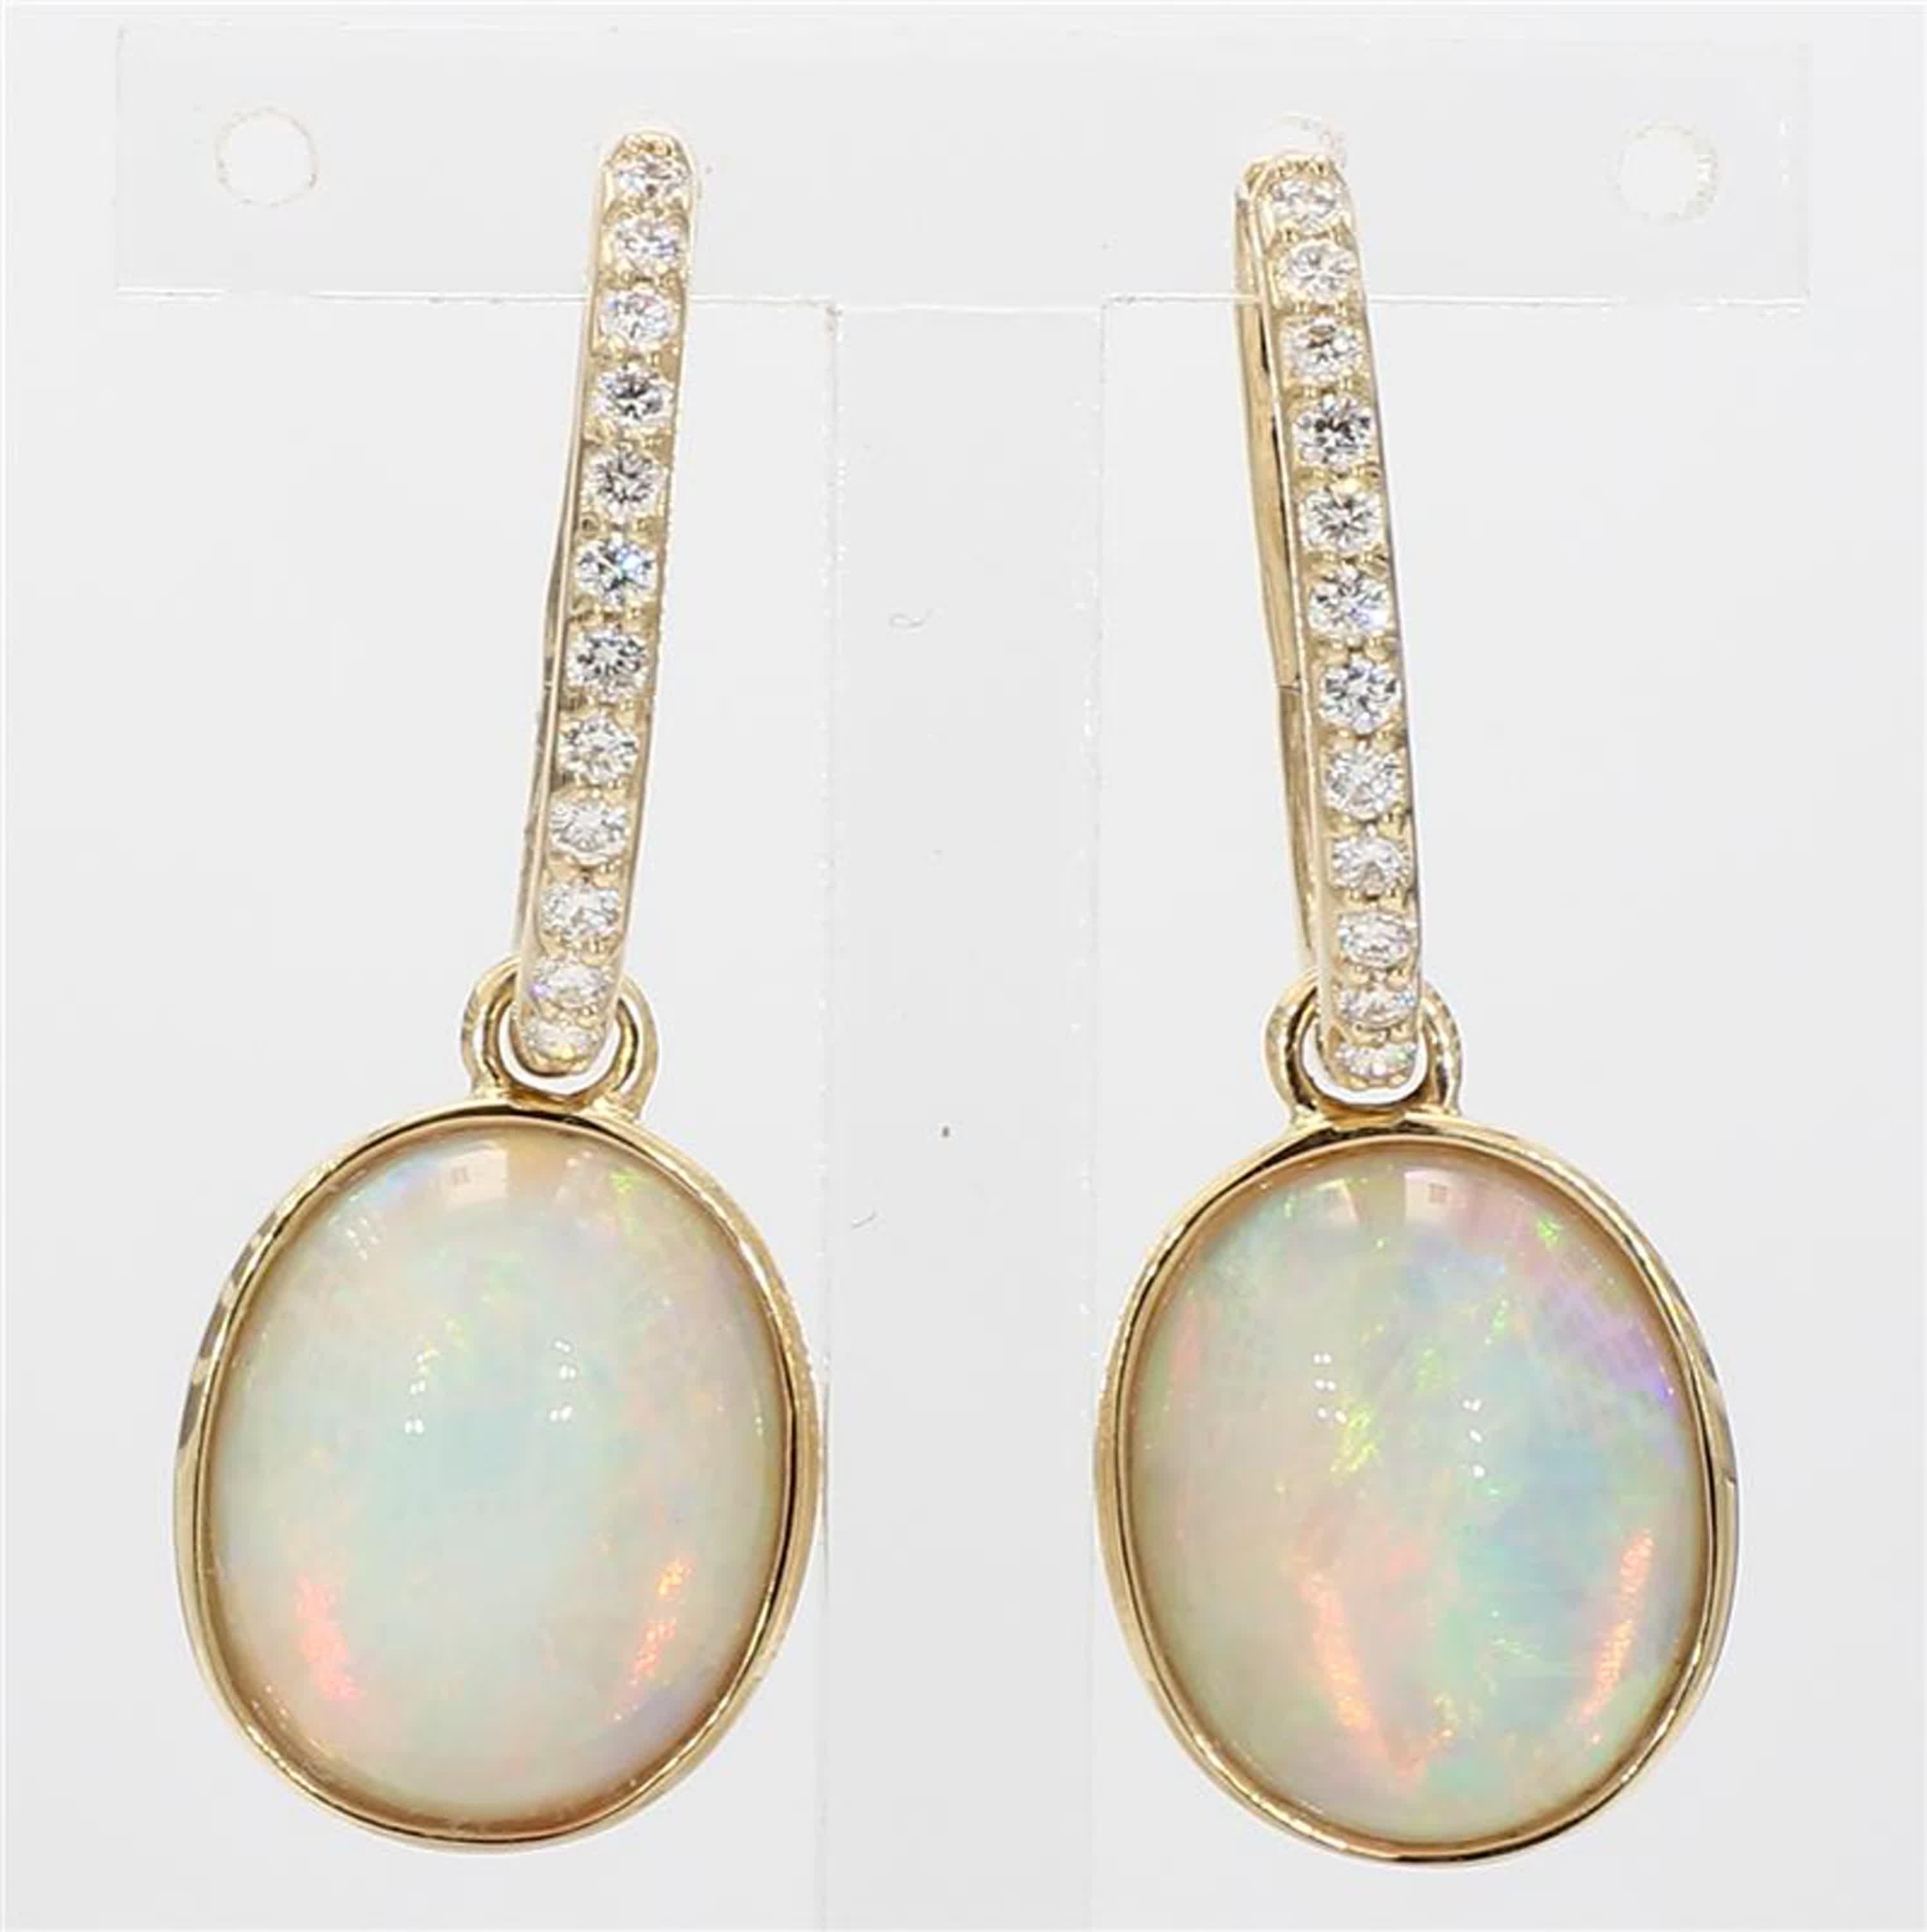 RareGemWorld's classic opal earrings. Mounted in a beautiful 14K Yellow Gold setting with natural oval cut opal's. The opal's are surrounded by natural round white diamond melee. These earrings are guaranteed to impress and enhance your personal